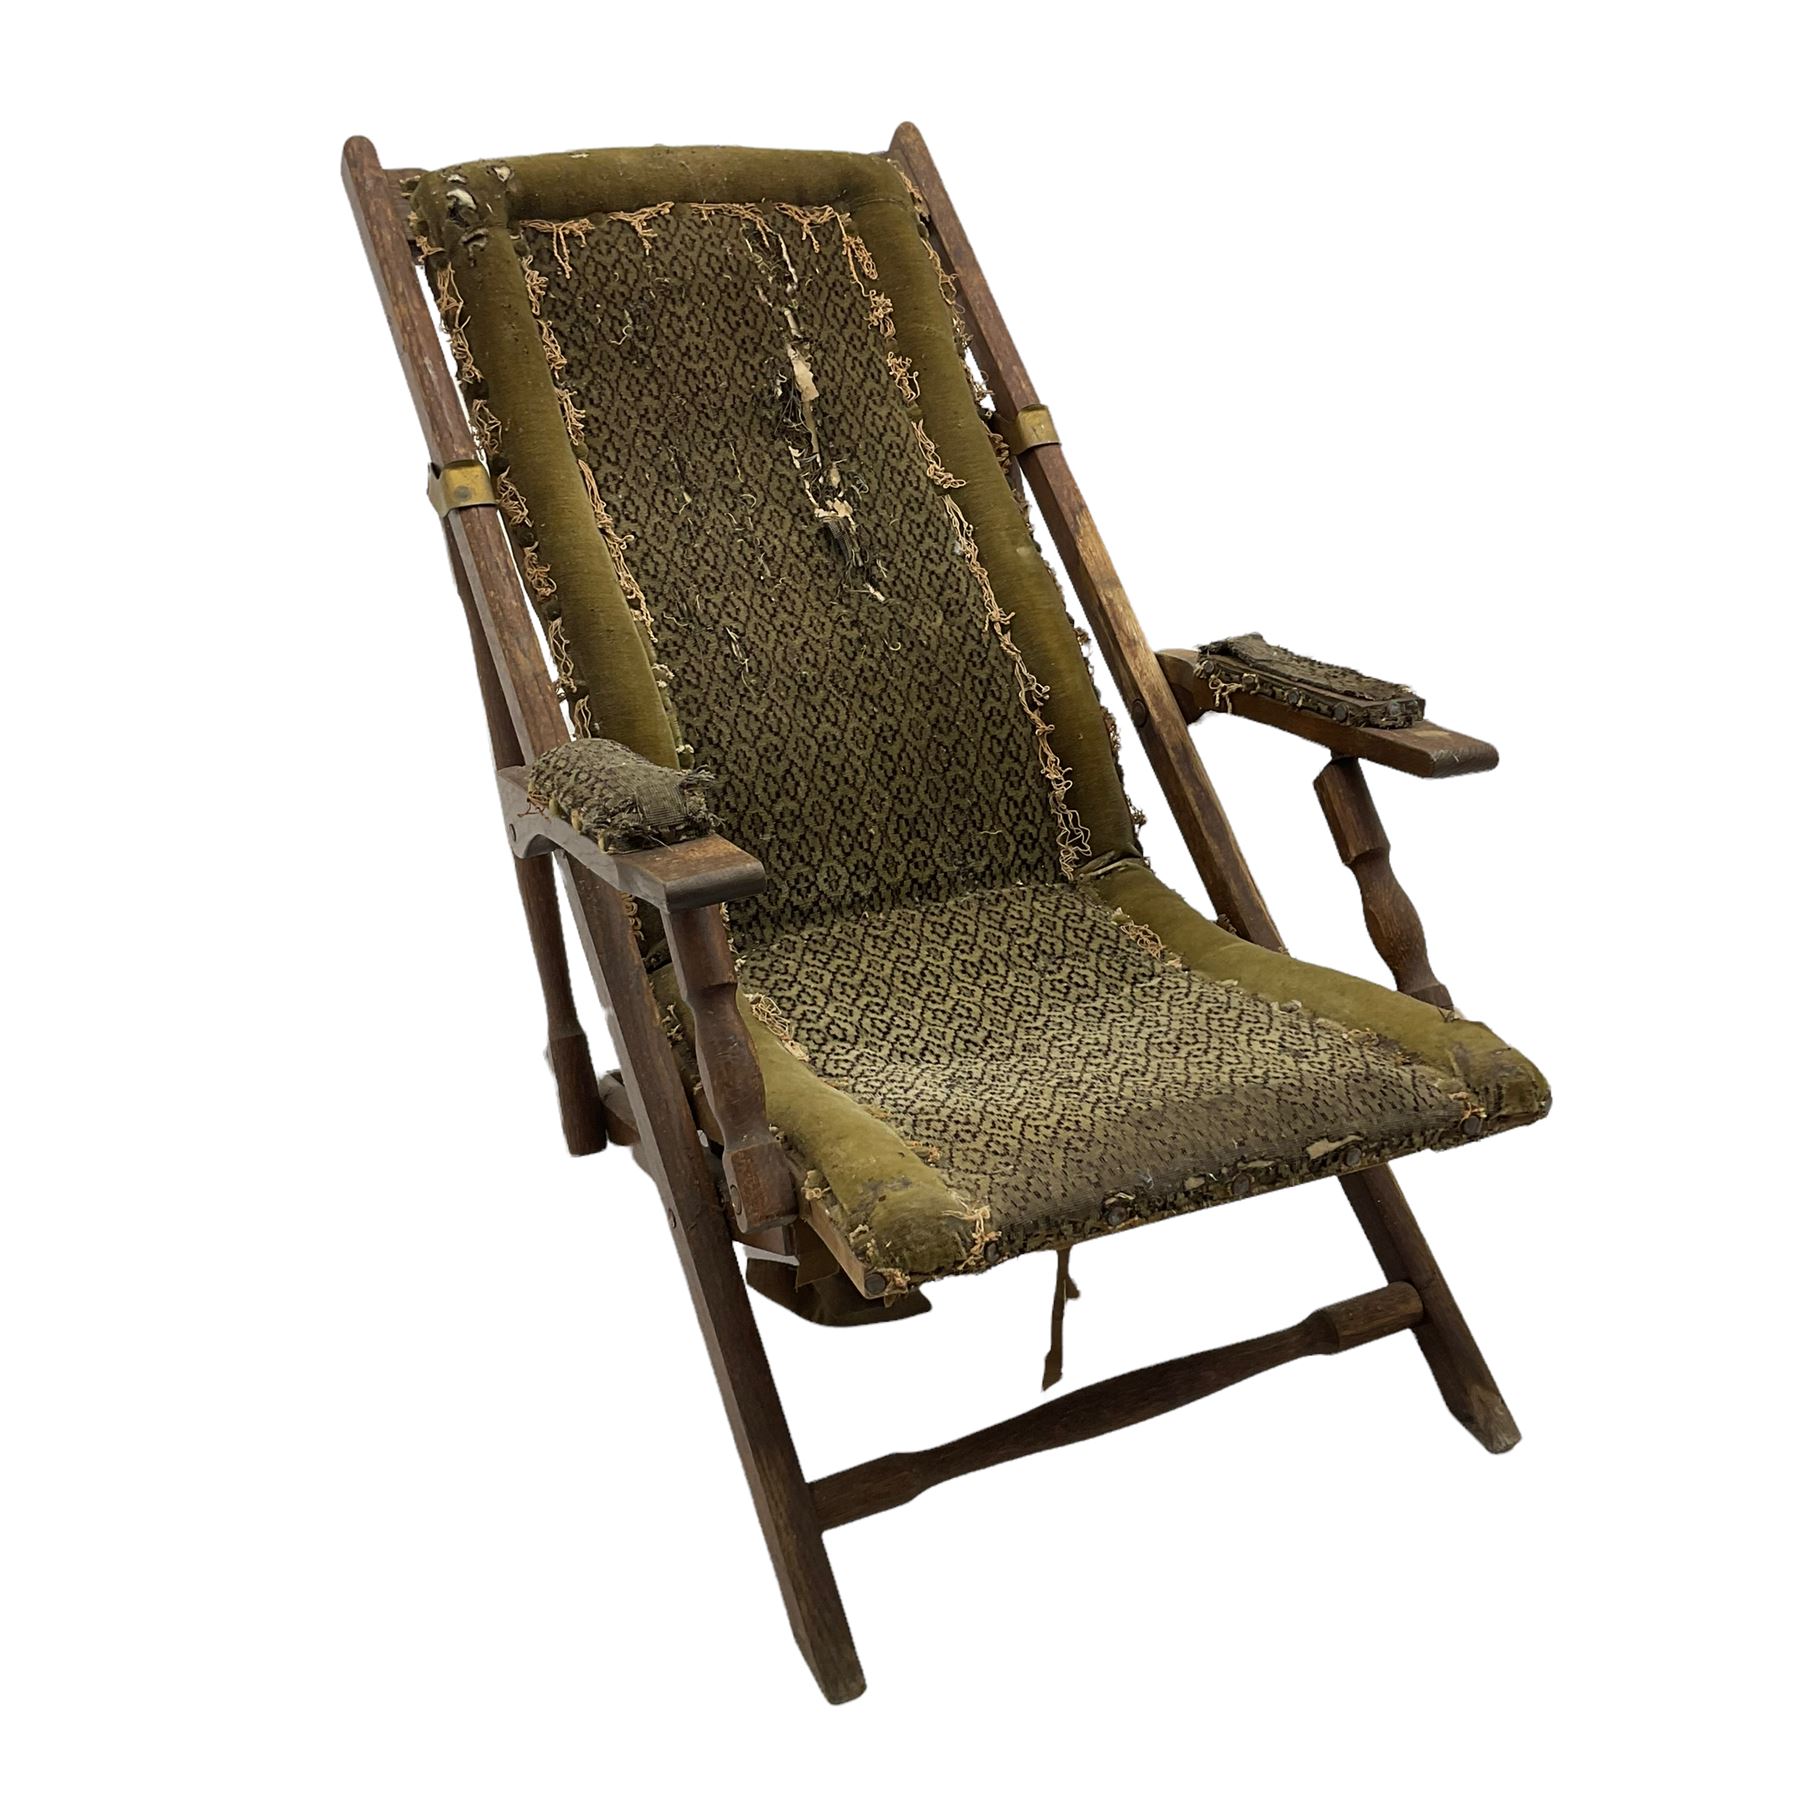 19th century oak campaign steamer or garden chair - Image 3 of 5